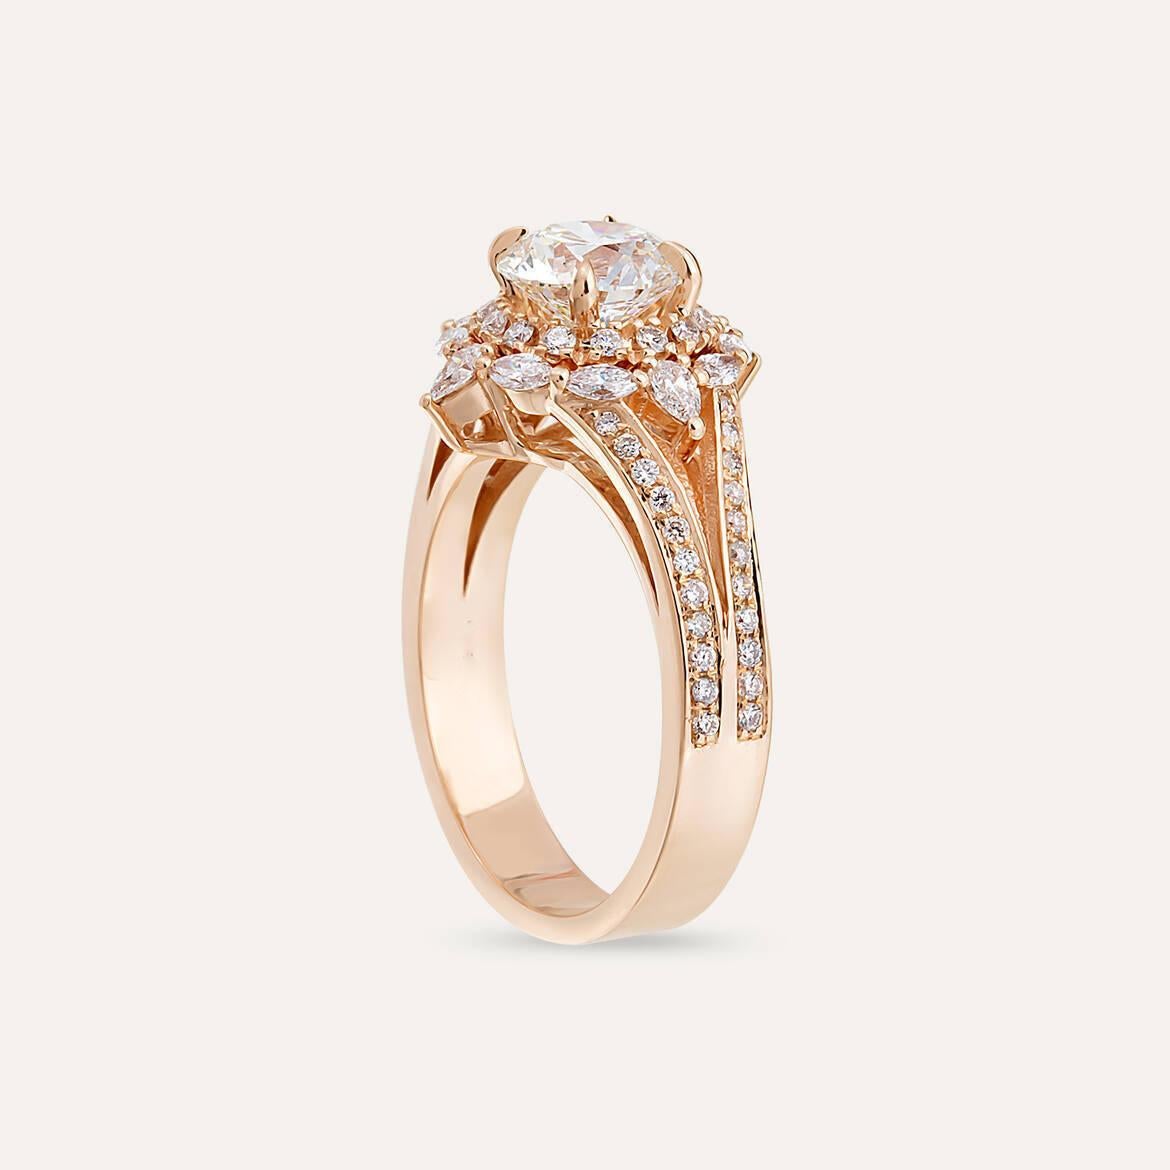 For Sale:  2.20 Carat Round, Pear and Marquise Cut Diamond 18K Rose Gold Ring 6